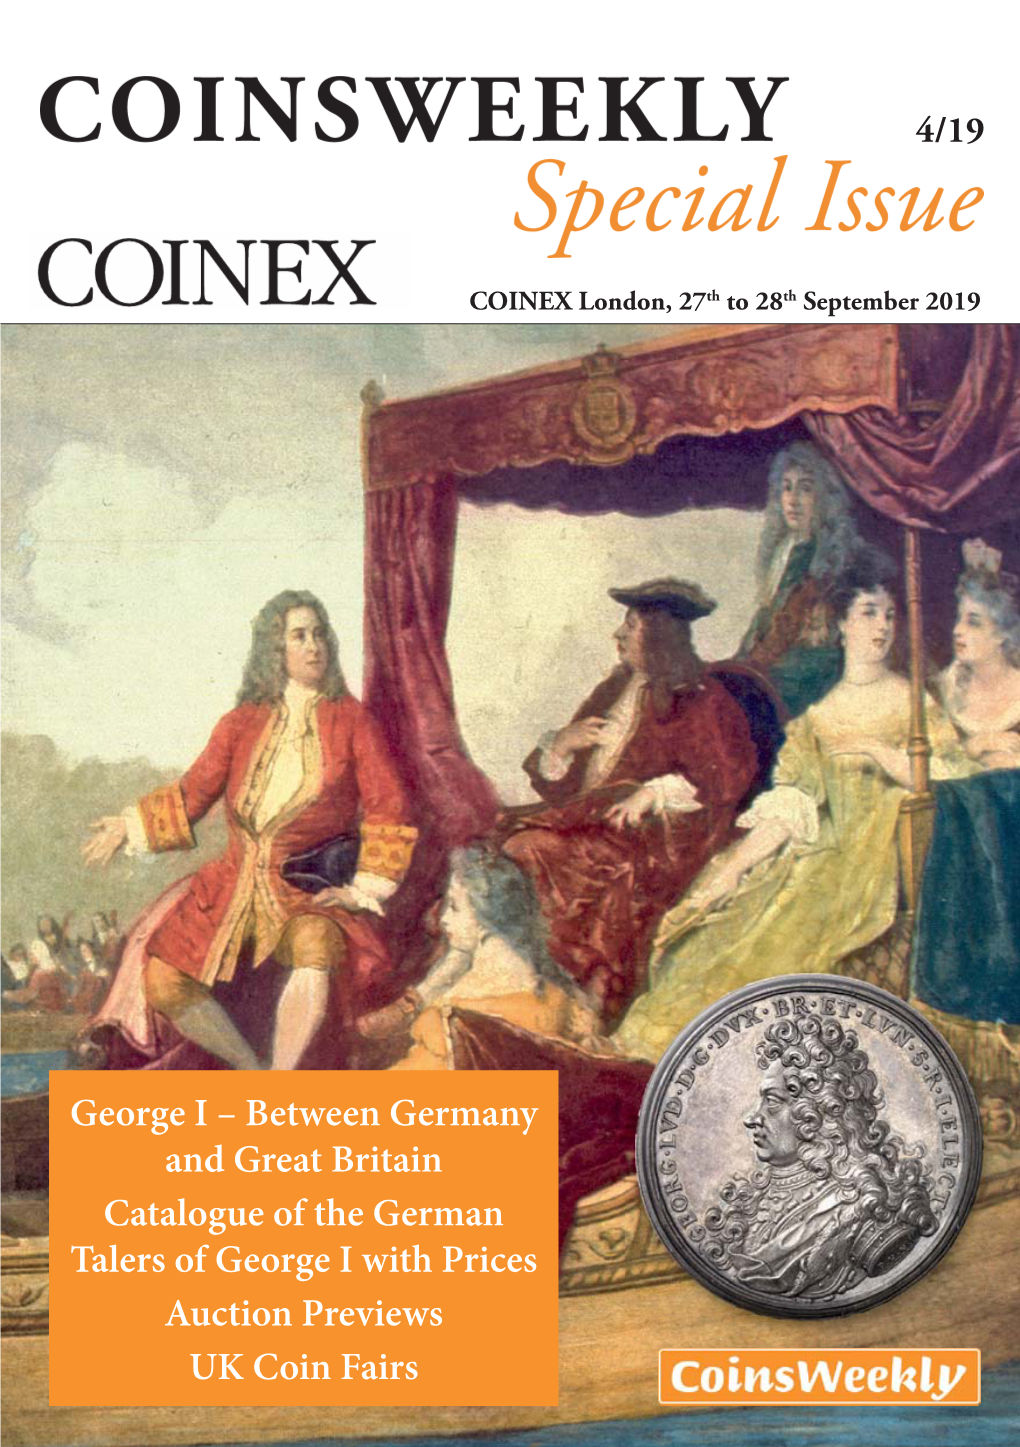 George I – Between Germany and Great Britain Catalogue of the German Talers of George I with Prices Auction Previews UK Coin Fairs